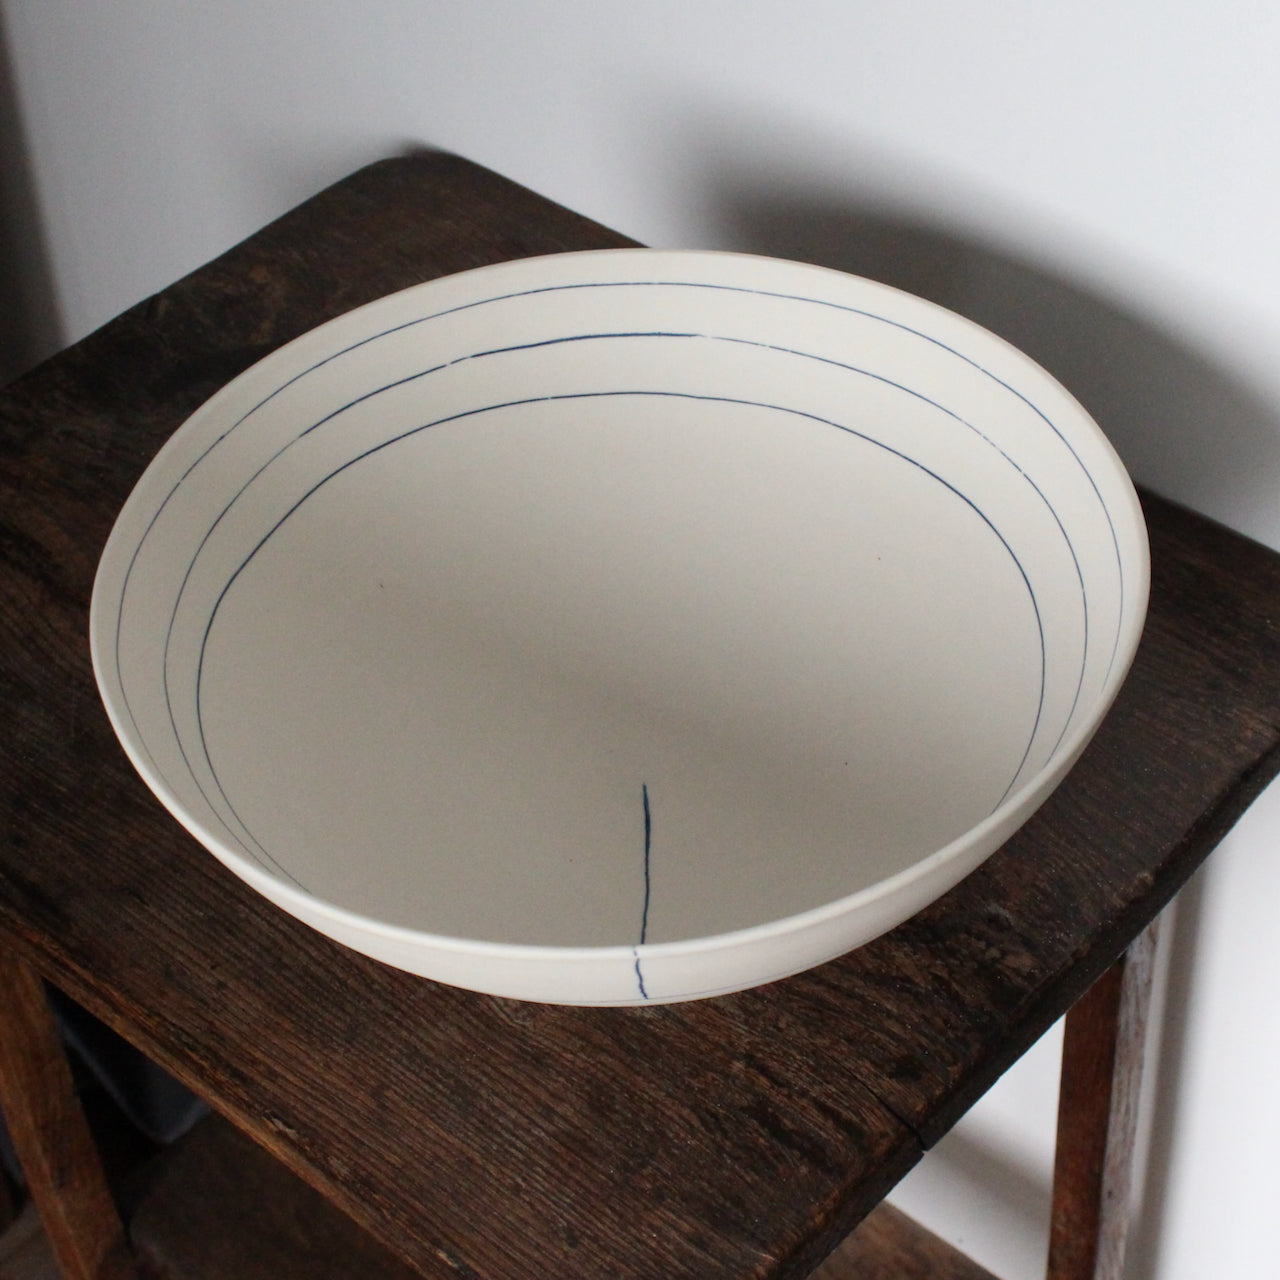 large white porcelain bowl with three blue lines on interior by UK ceramicist Liz O'Dwyer 